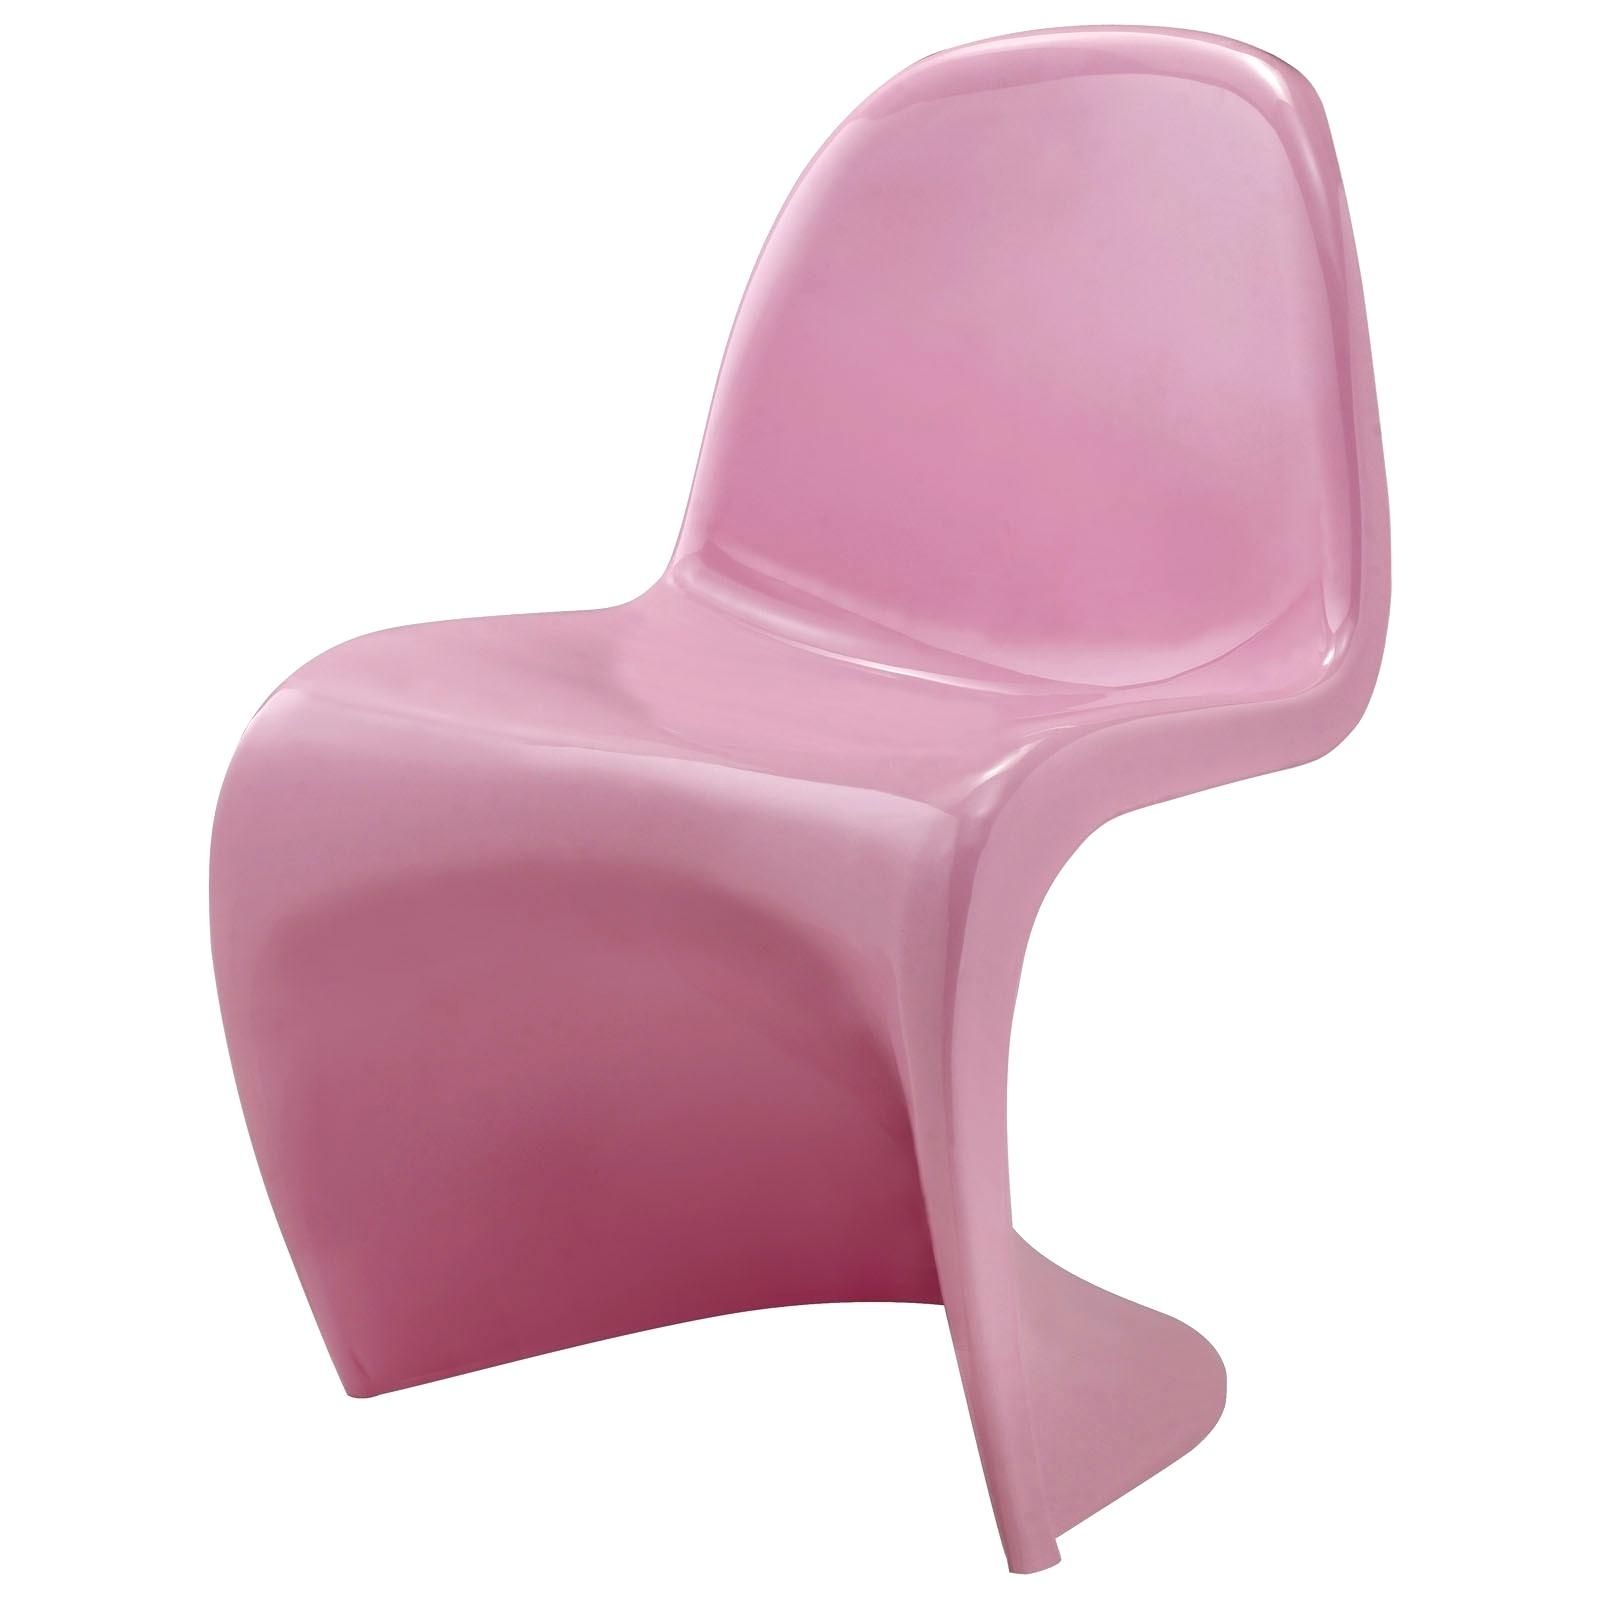 Pink Chaises In Fashionable Design D'intérieur ~ Chaise Style Panton Verner Pink Chair Free (View 13 of 15)